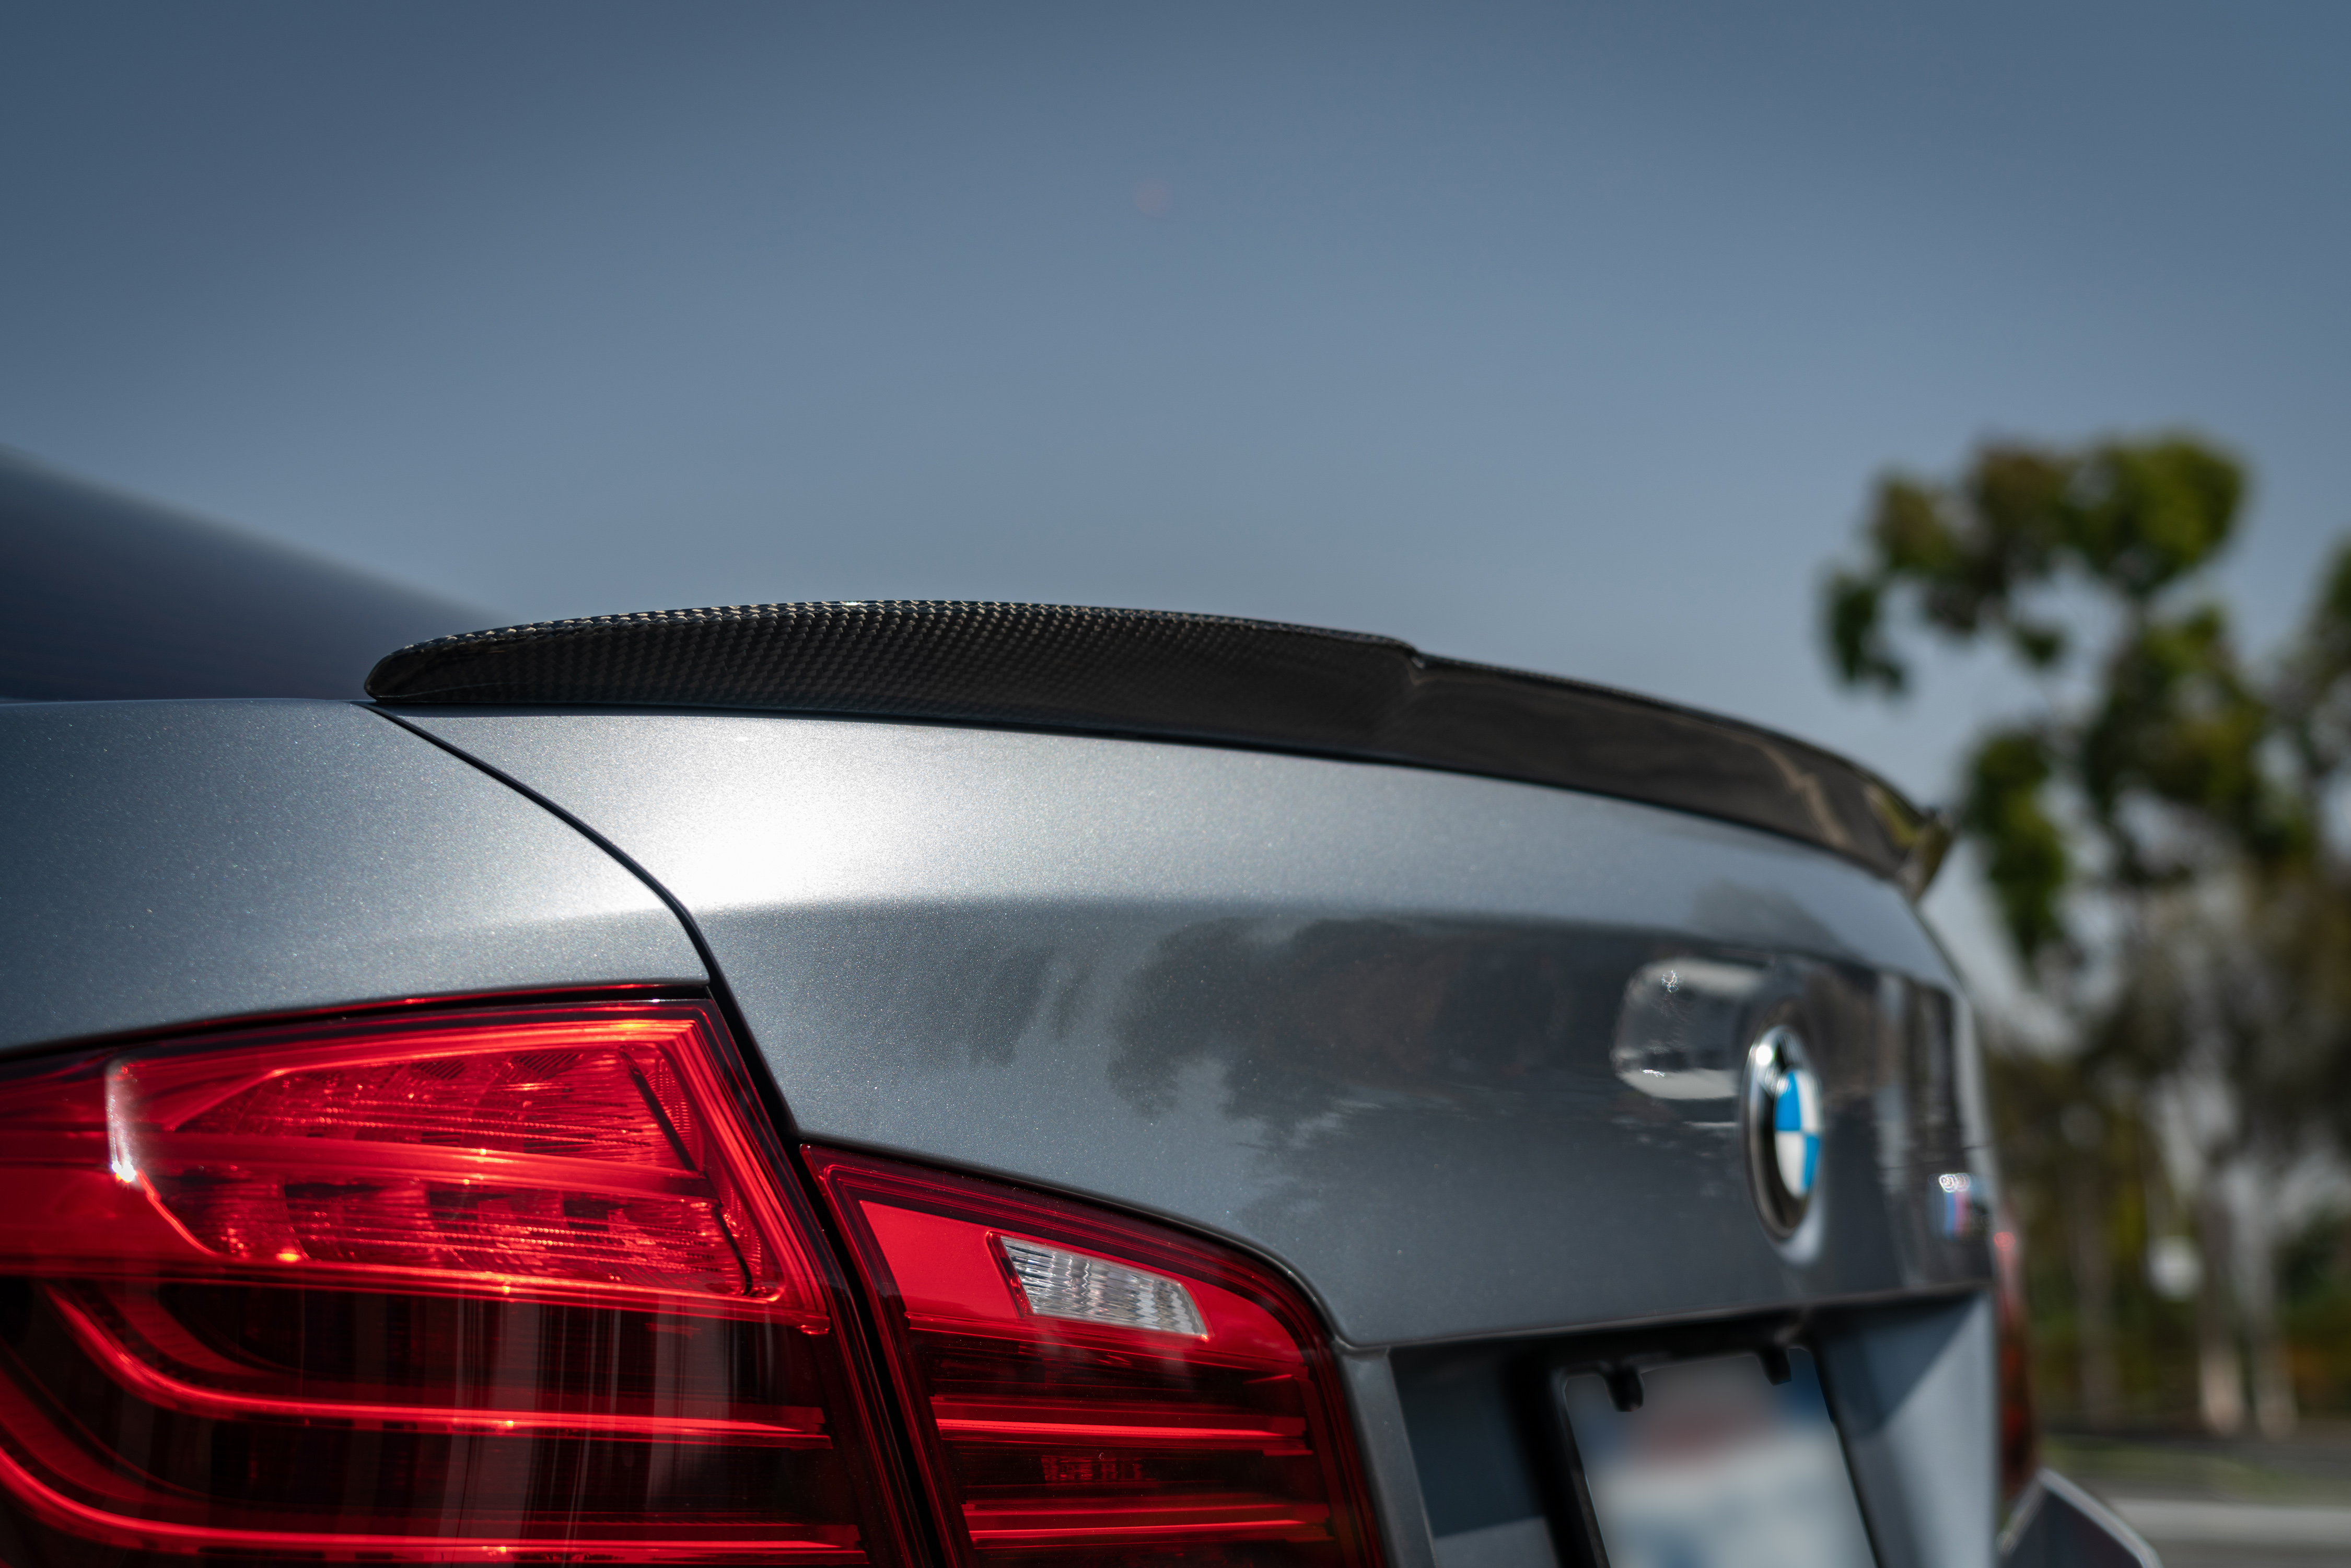 rw carbon fiber bmw f10 m5 arkym style trunk spoiler and dtm style rear diffuser